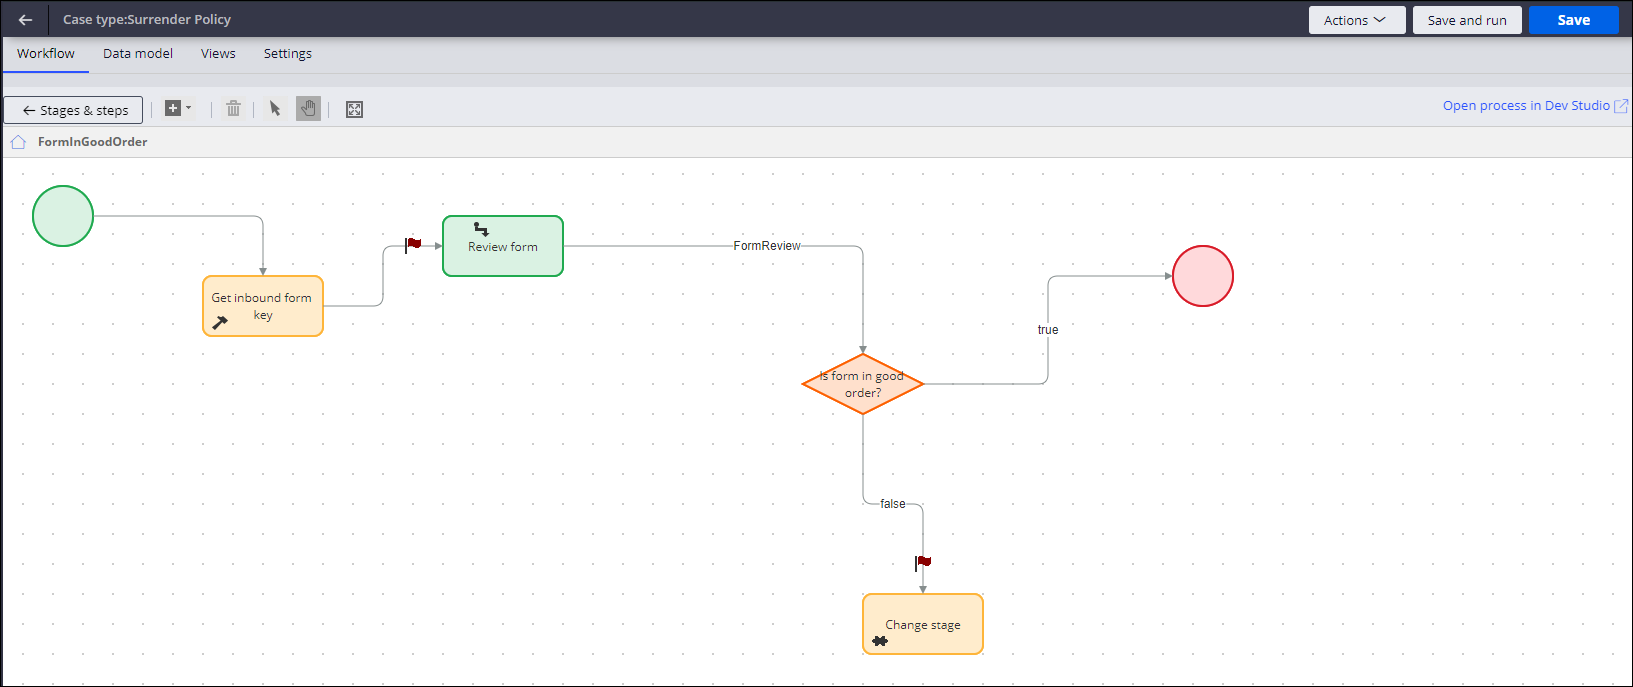 FormInGoodOrder flow which defines how the forms are verified by a back-office representative